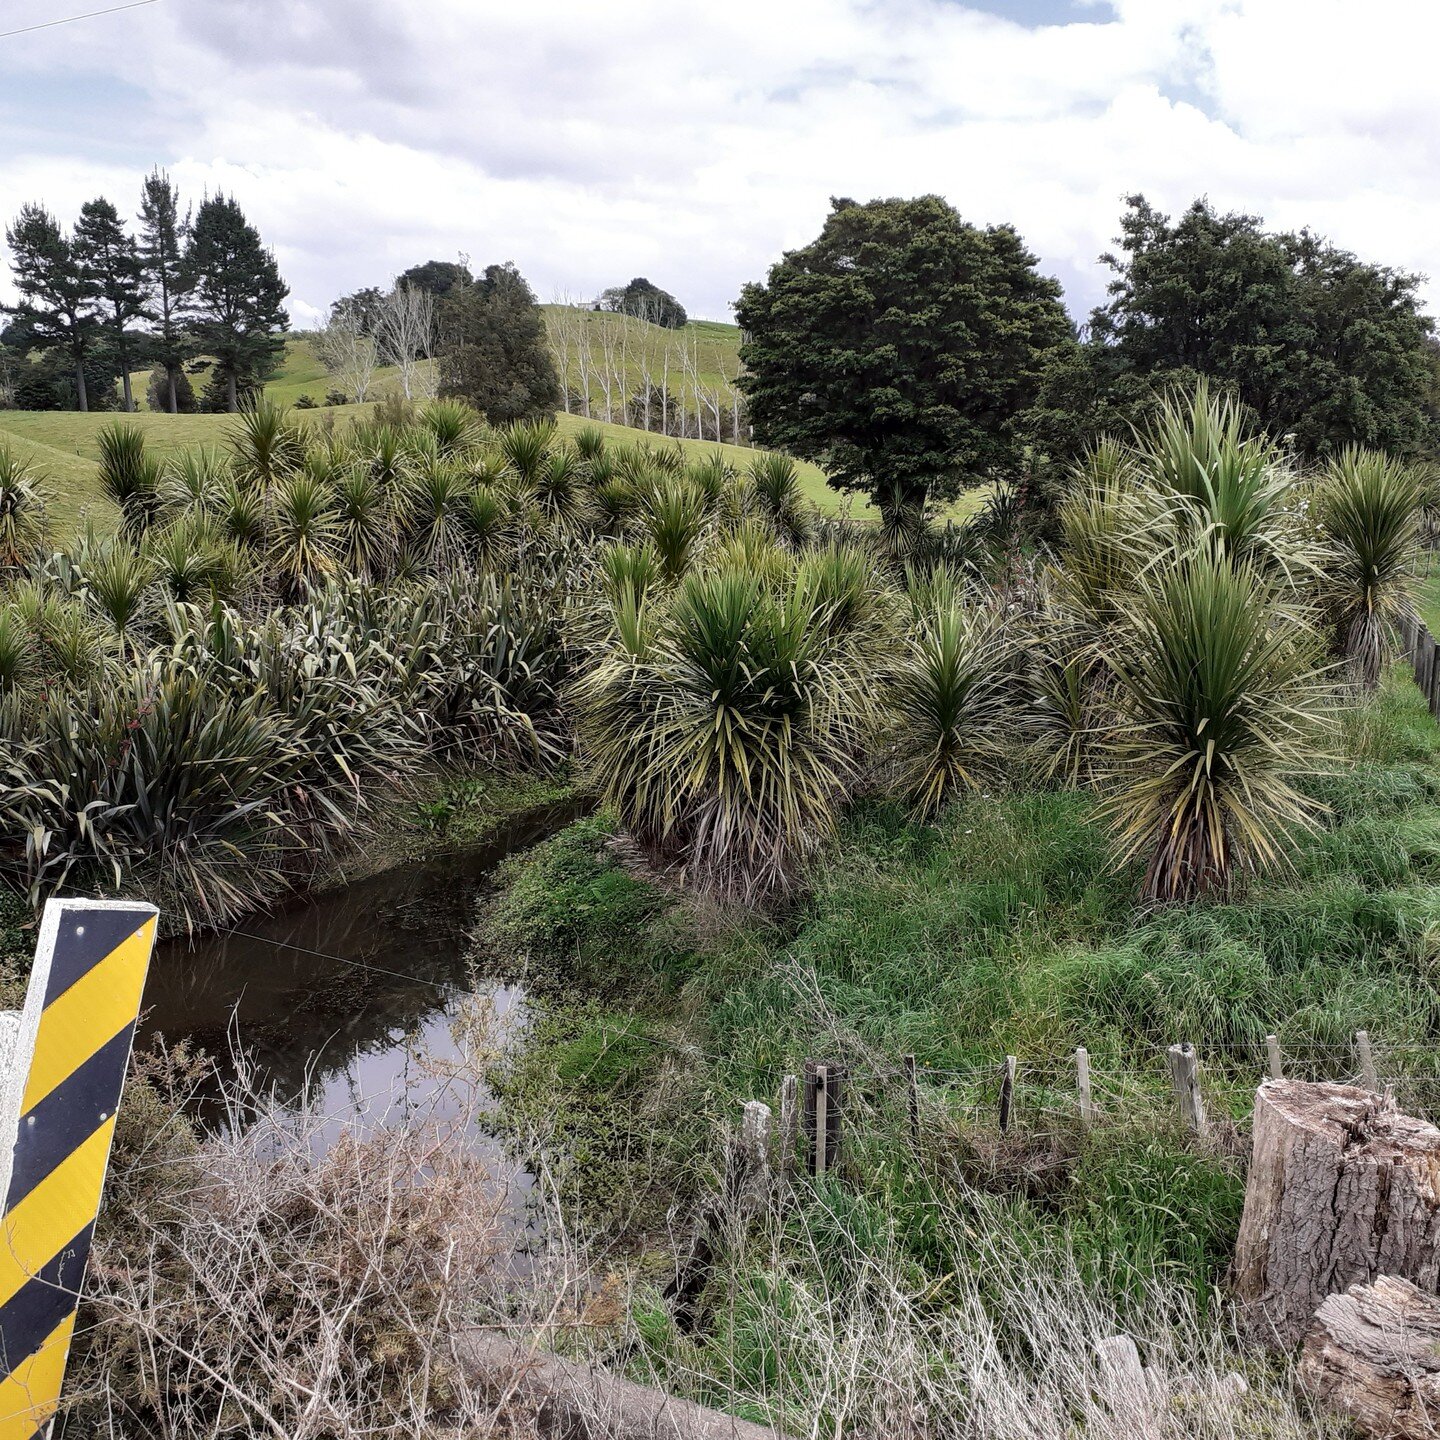 Always interesting to check out young forests a few years after planting.

Tī kōuka/cabbage tree (Cordyline australis) is the star of the show here, it's narrow, upright form and deep tap-root making it a key tool in mitigating streambank erosion - a